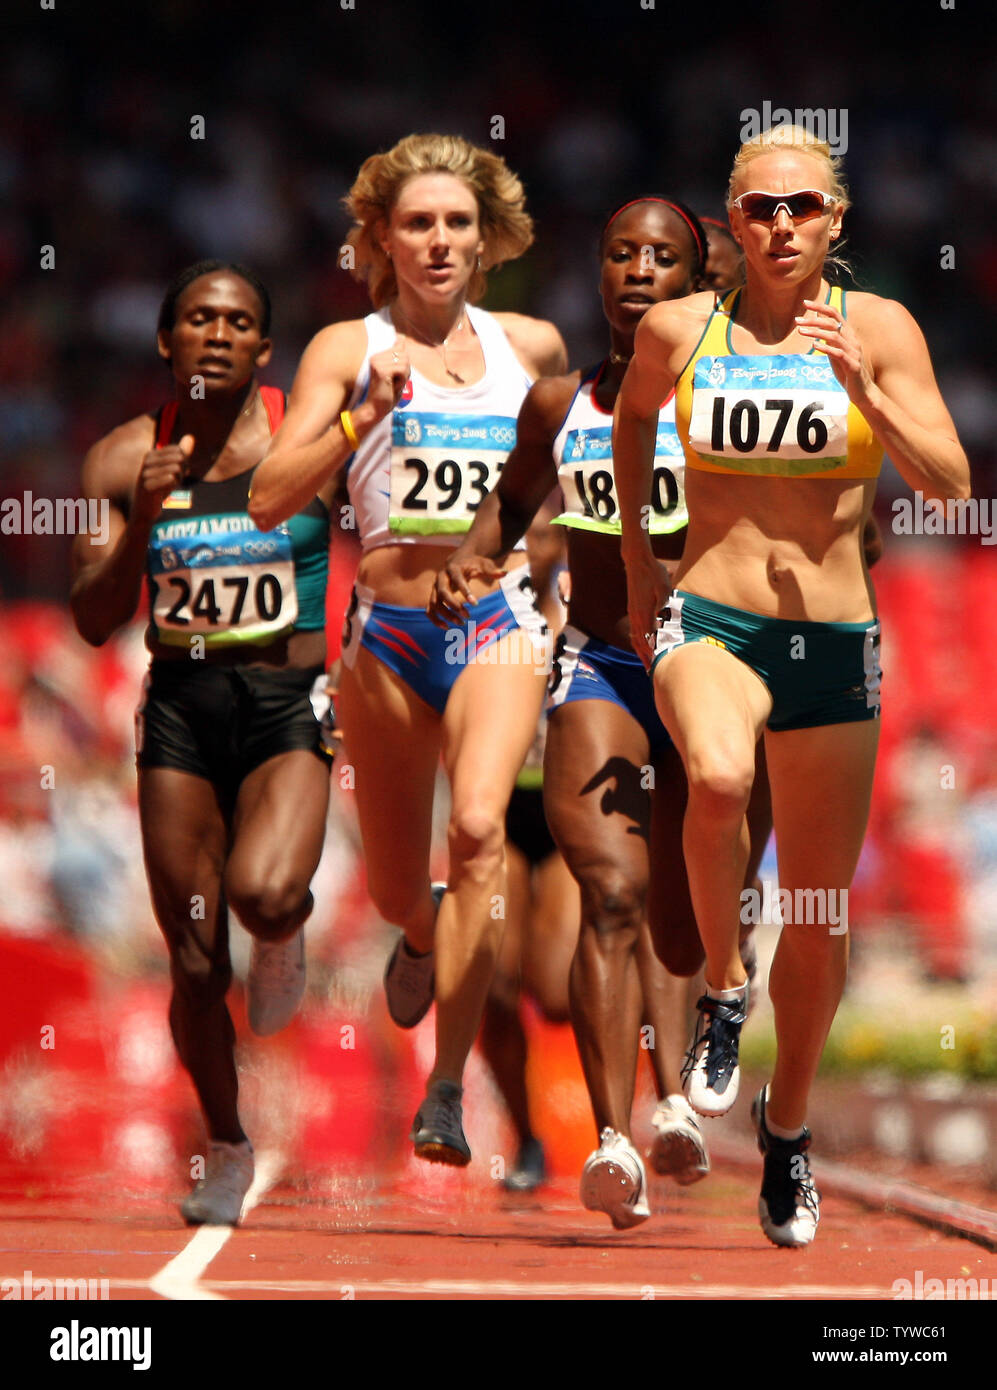 (R-L)  Austria's Tamsyn Lewis leads Britain's Marilyn Okoro, Slovakia's Lucia Klocova and Mozambique's Maria Mutola after the first lap in the Olympic women's 800m round one heats in Beijing August 15, 2008.  Mutola won the heat with a time of 1:58.91.  (UPI Photo/Stephen Shaver) Stock Photo